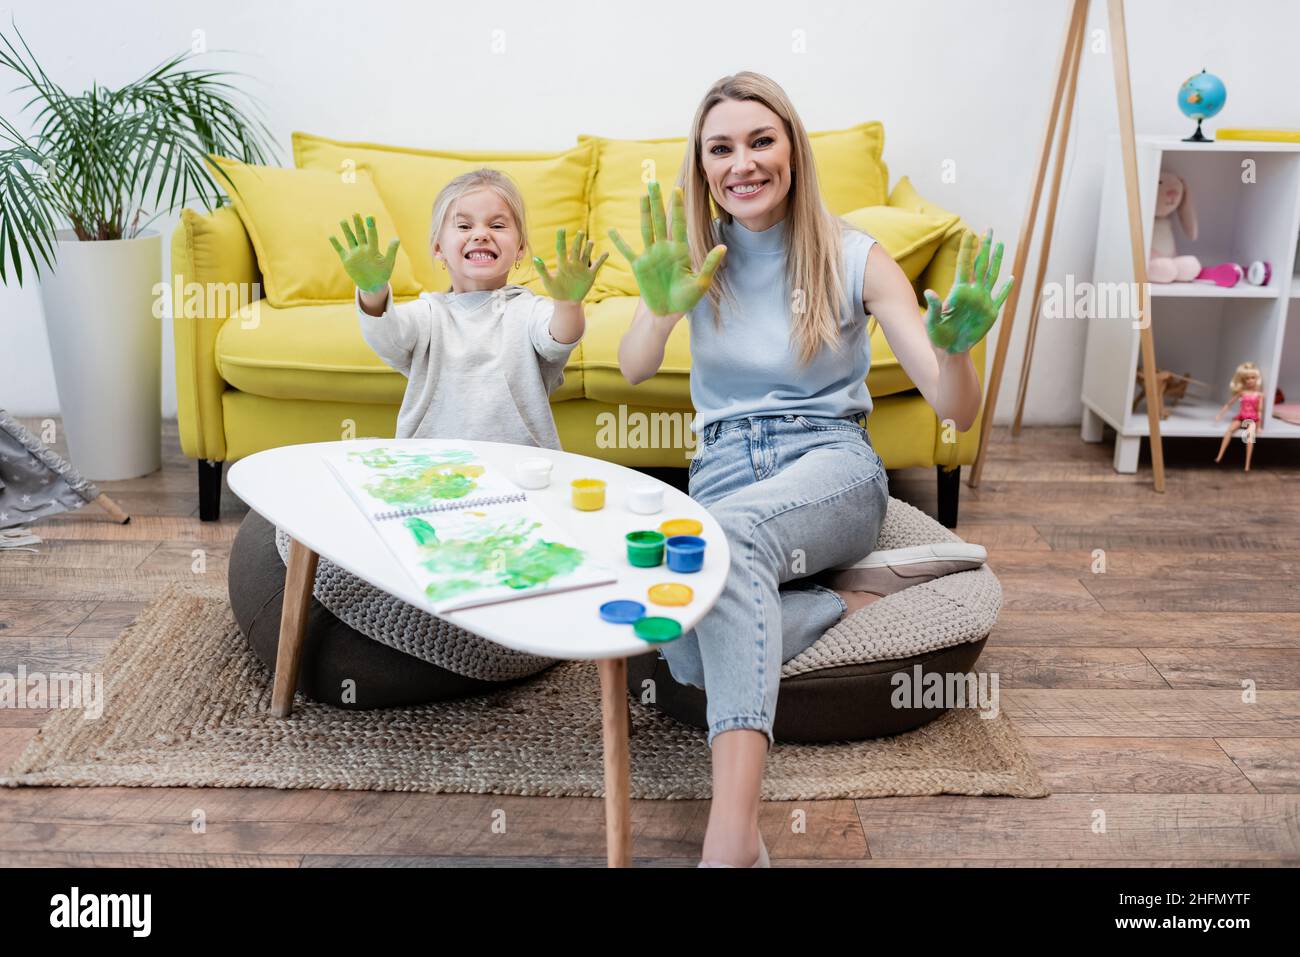 Smiling mother and child looking at camera while showing hands in paint at home Stock Photo